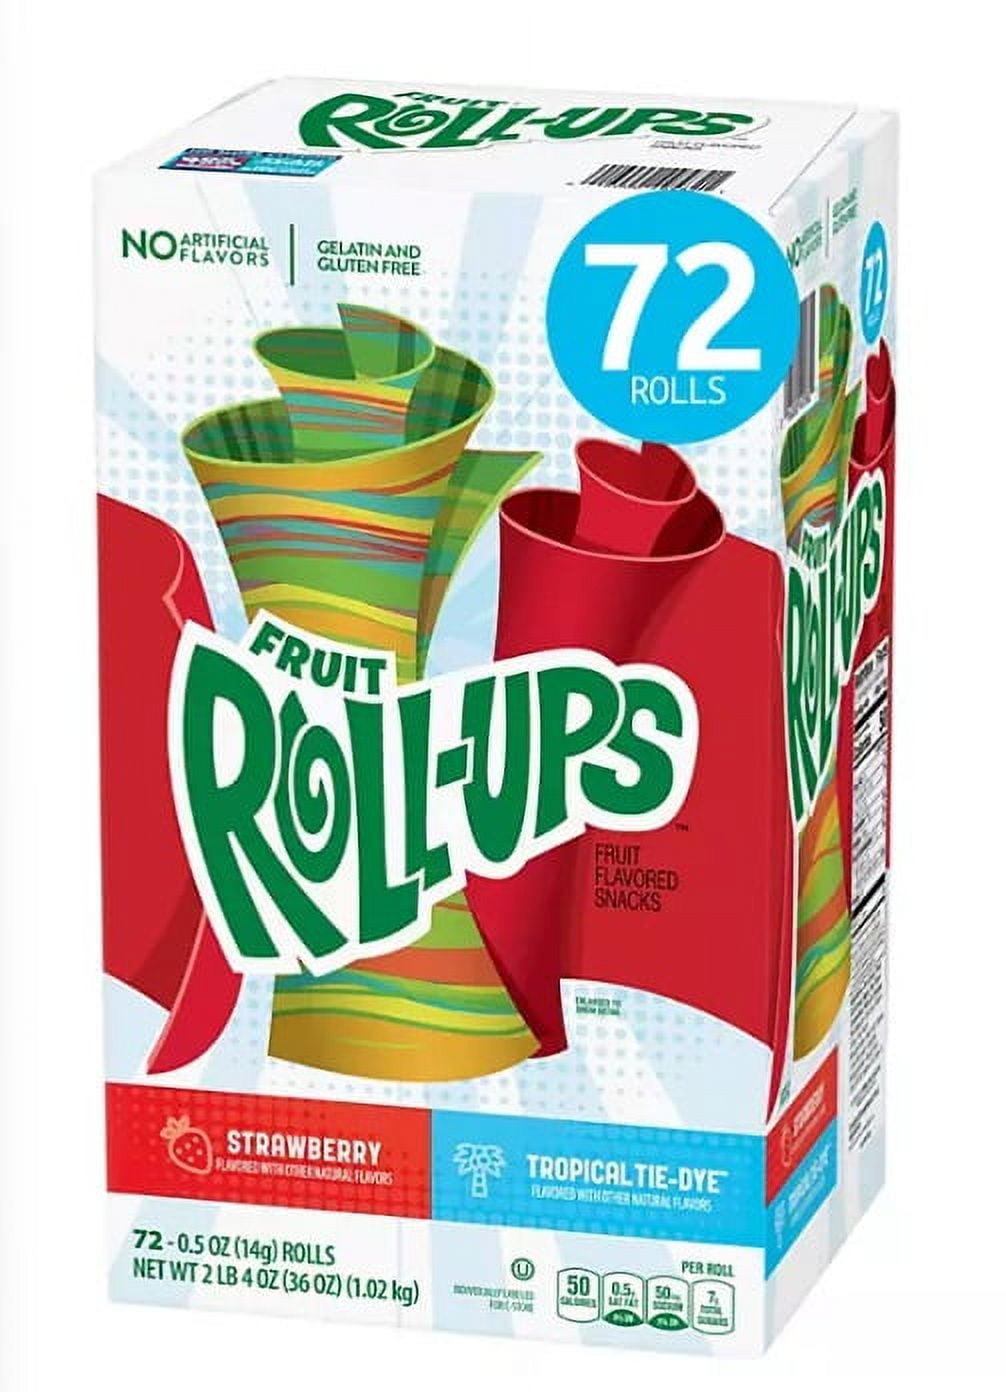 Fruit Roll-Ups Fruit Flavored Snacks, Variety Pack, Pouches, 10 ct